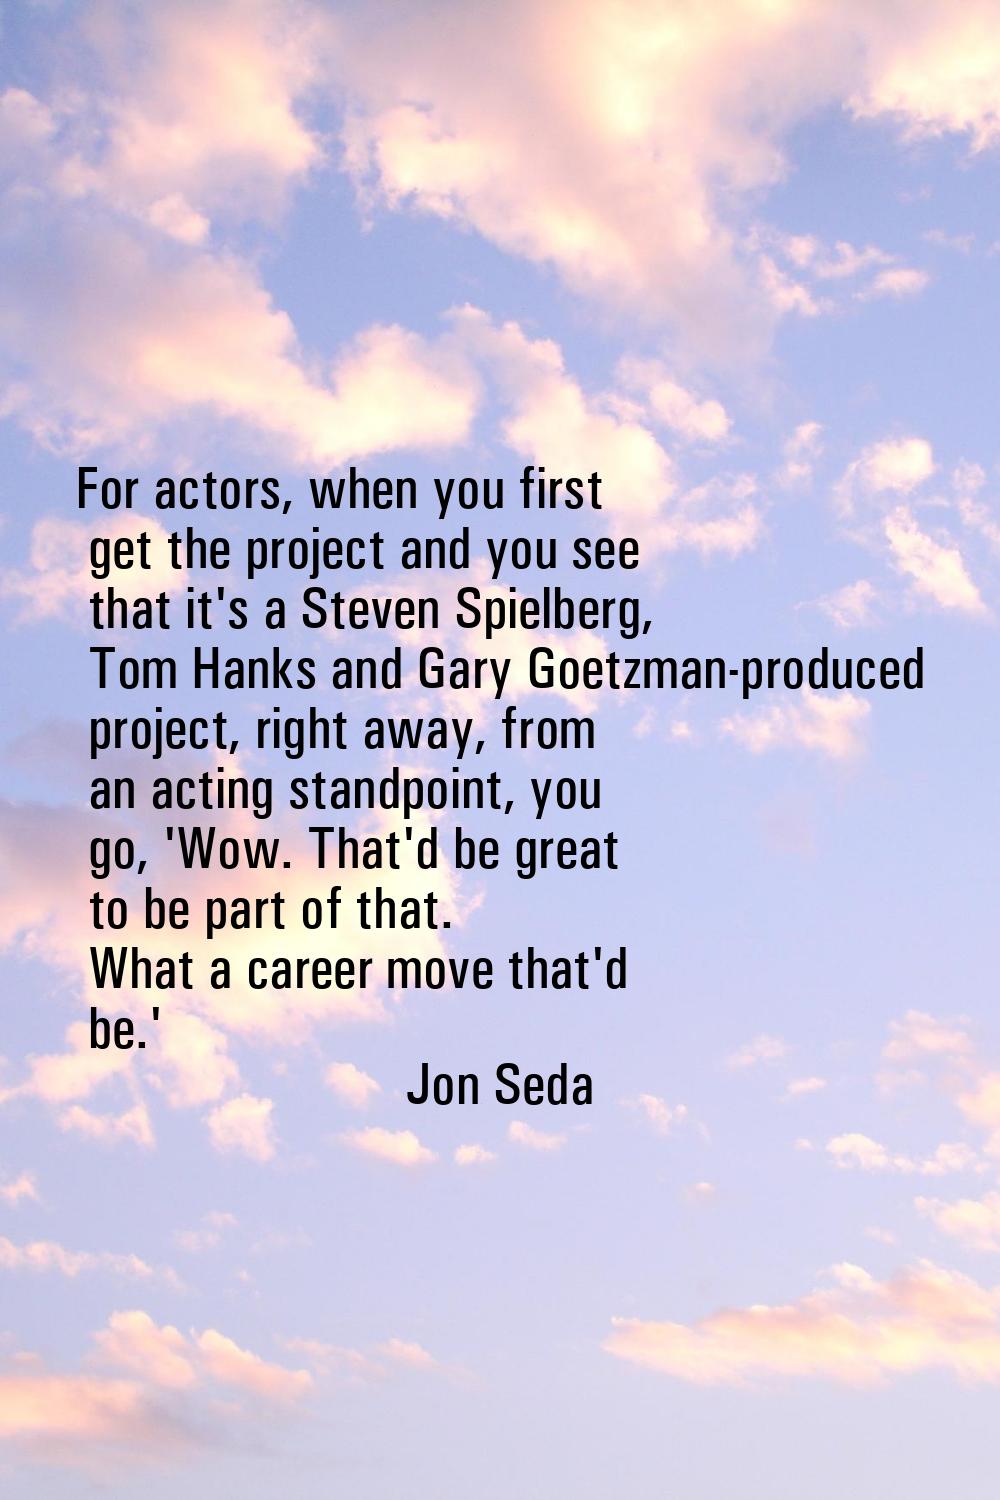 For actors, when you first get the project and you see that it's a Steven Spielberg, Tom Hanks and 